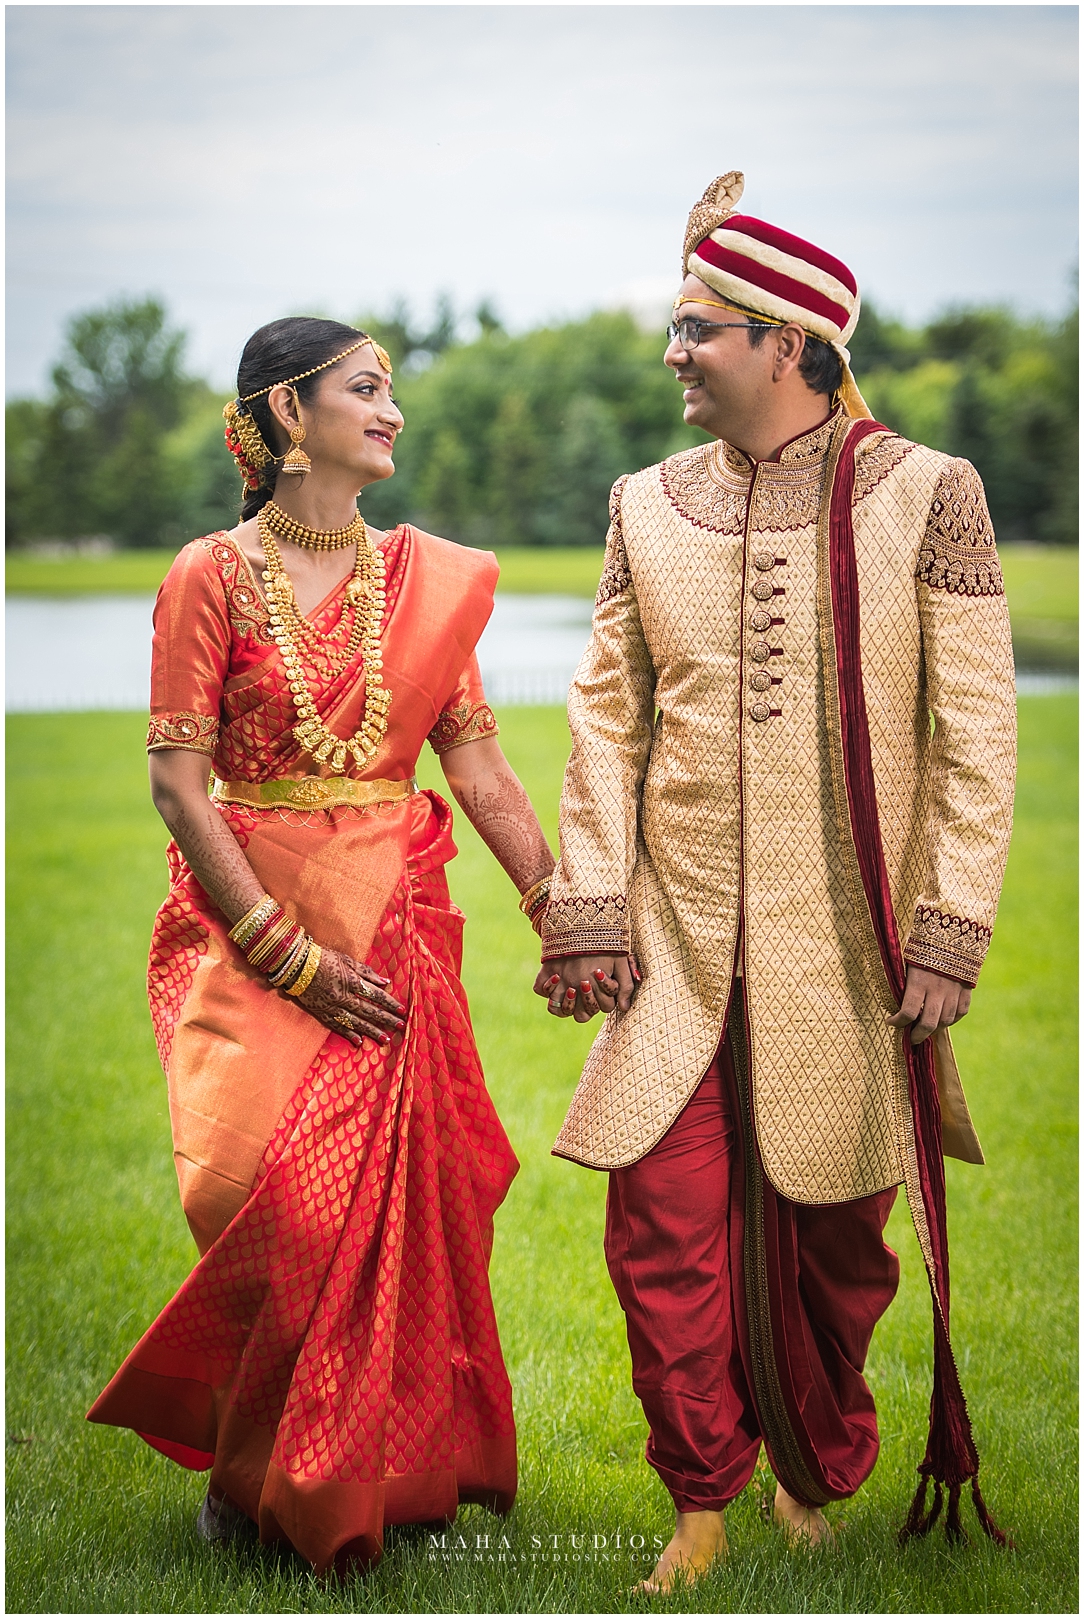 South Indian Bride walking in saree with groom